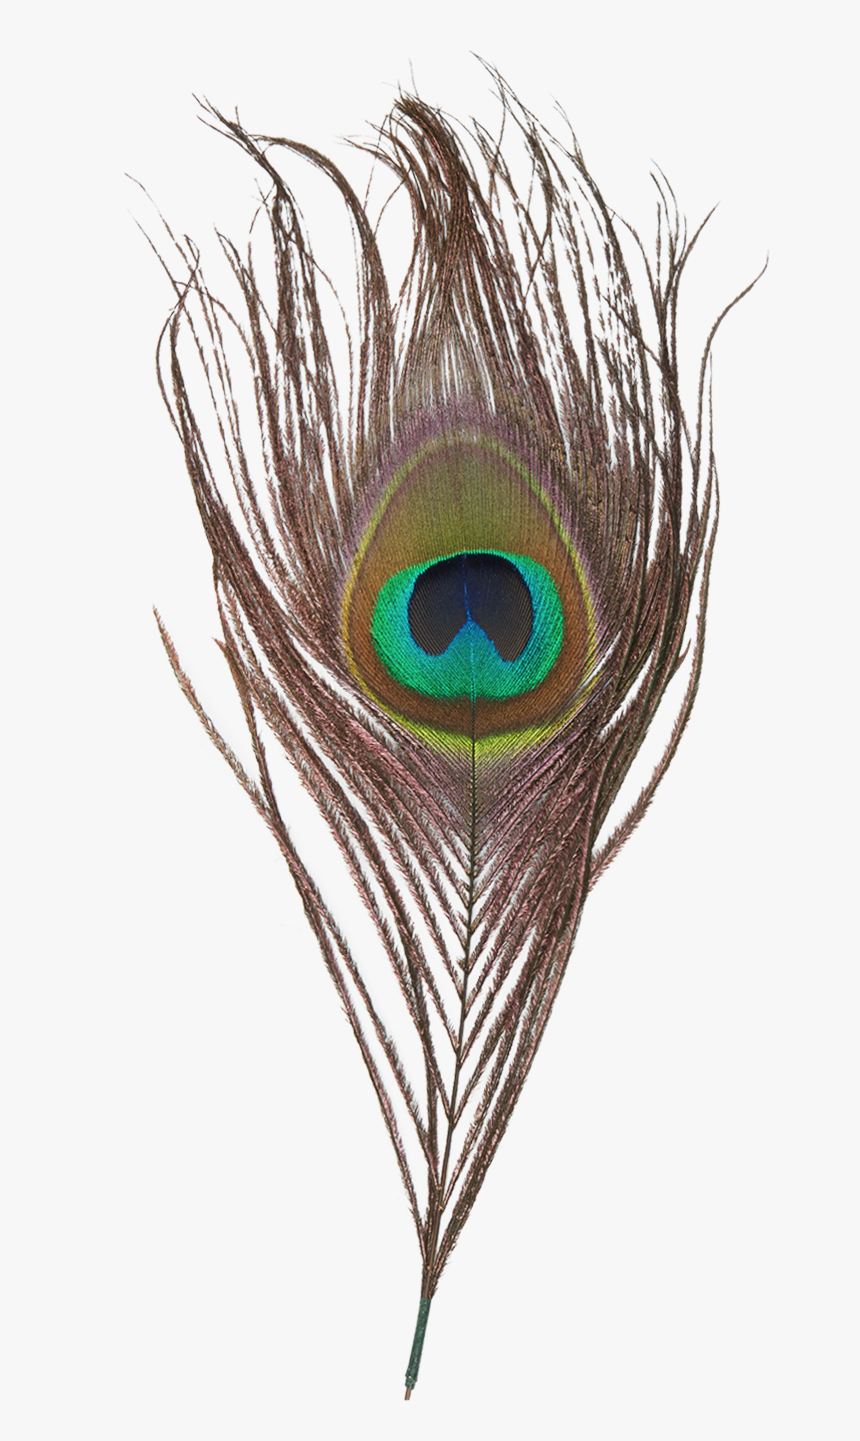 Peacock Feather Png Transparent Images - Peacock Feather Images Png, Png Download, Free Download